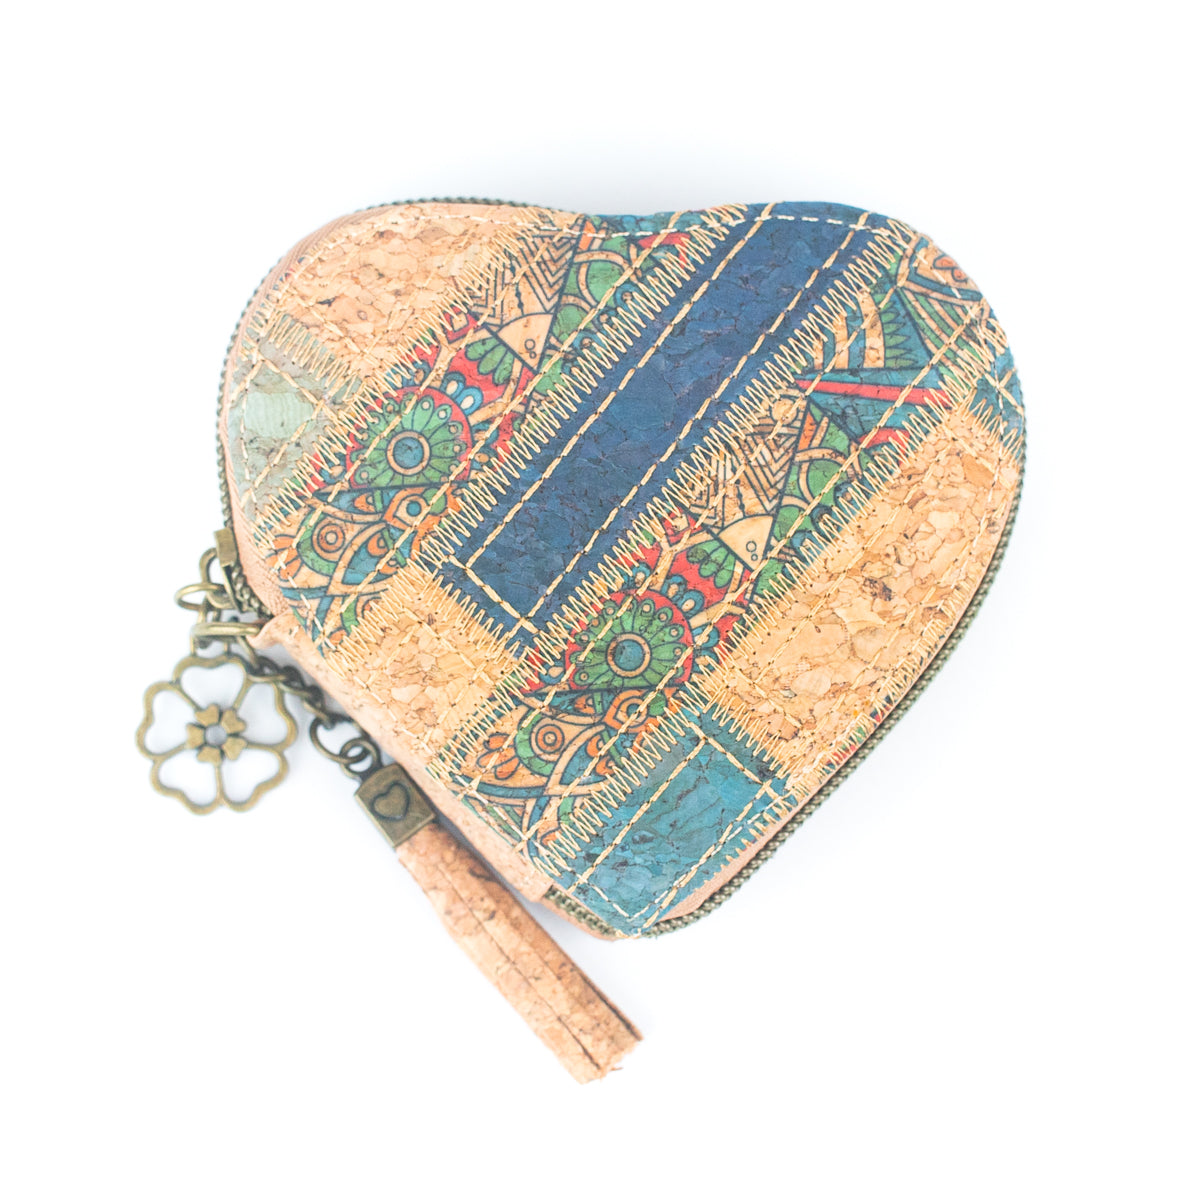 High Qulaity PU Leather Heart Shape Coin Purse at Rs 105/piece | Andheri  West | Mumbai | ID: 14053858662